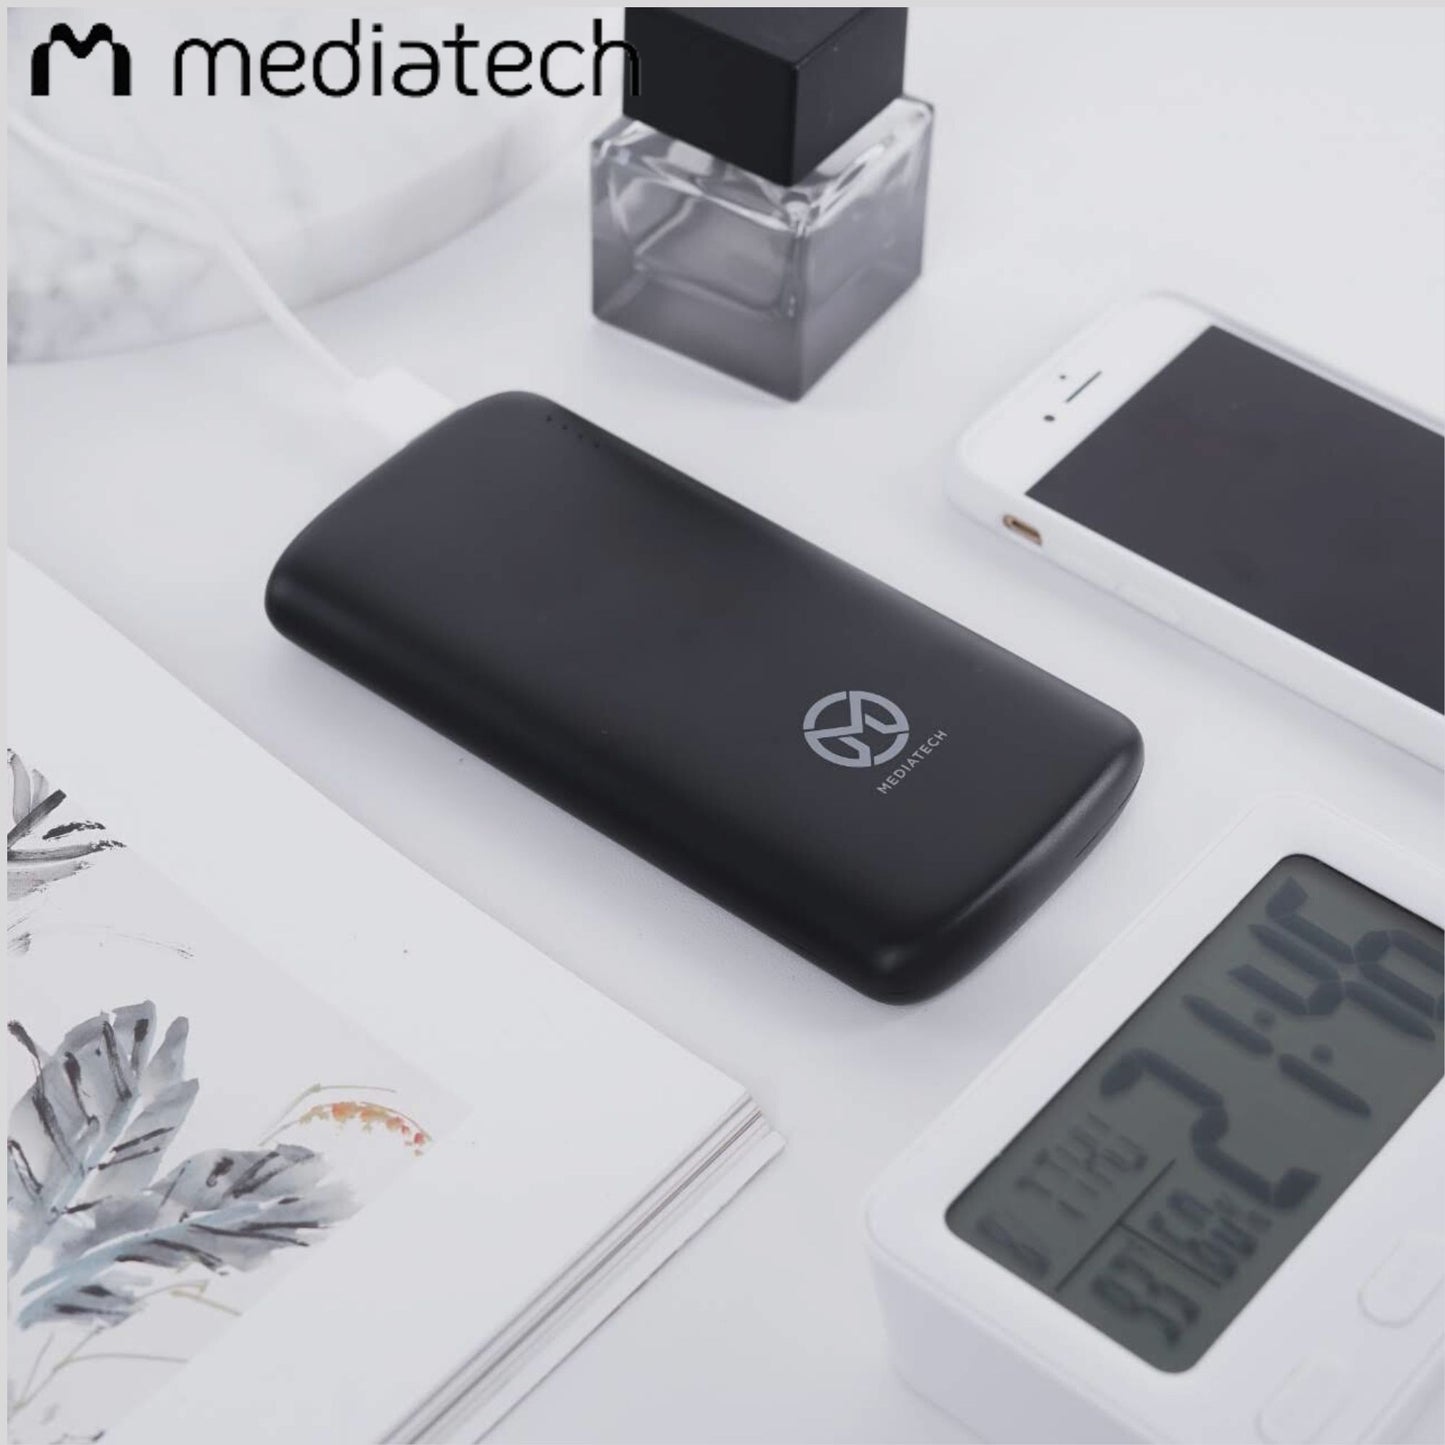 Mediatech Powerbank Quick Charge 3.0 Power Delivery PW 503 10000 mAh - 63938